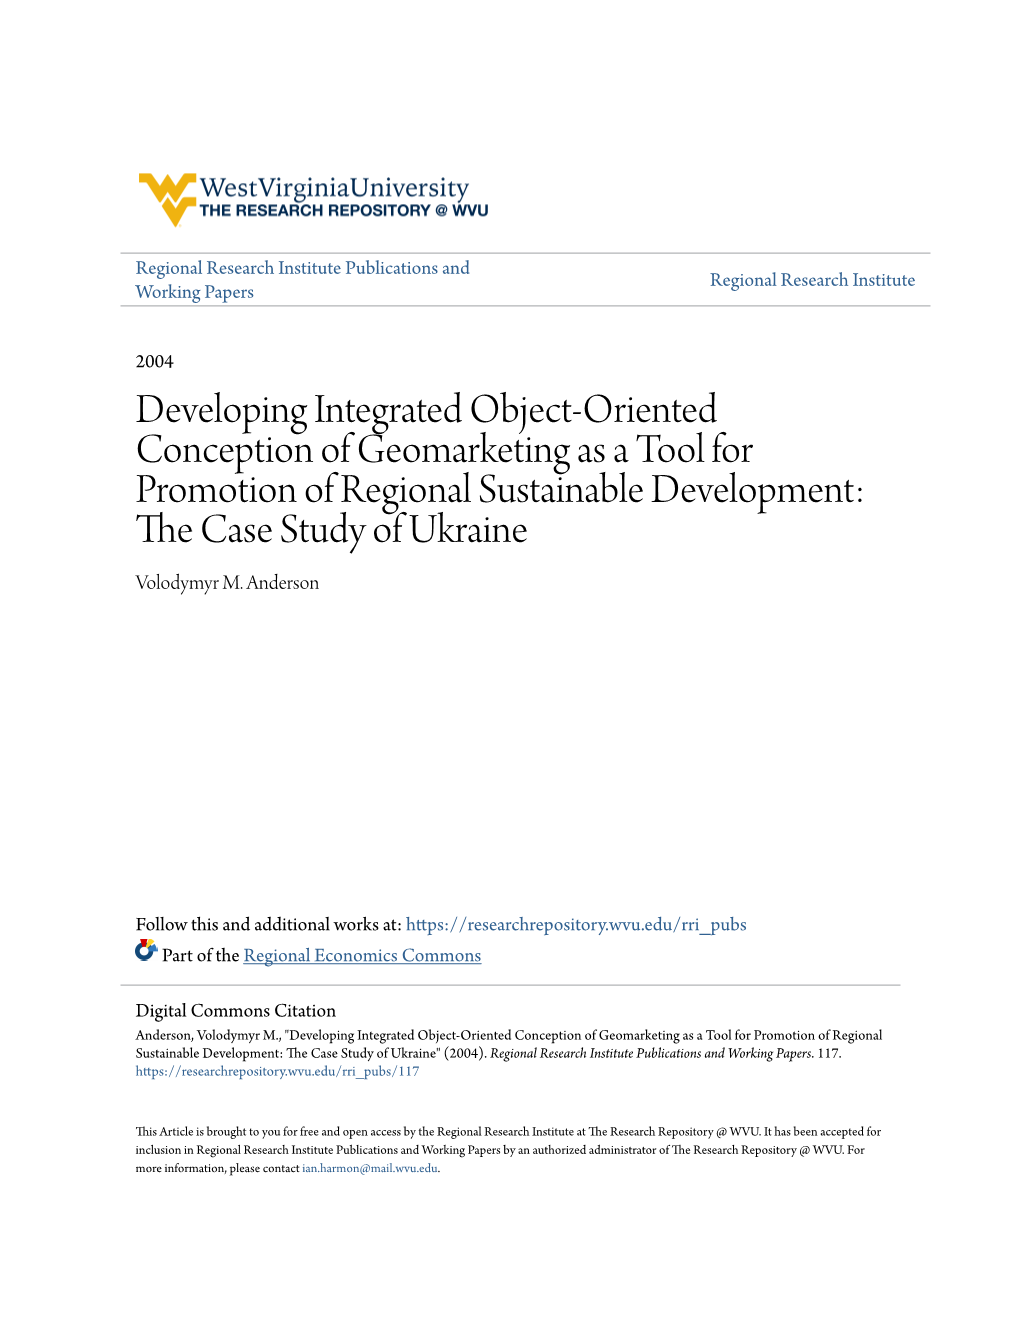 Developing Integrated Object-Oriented Conception of Geomarketing As a Tool for Promotion of Regional Sustainable Development: the Ac Se Study of Ukraine Volodymyr M